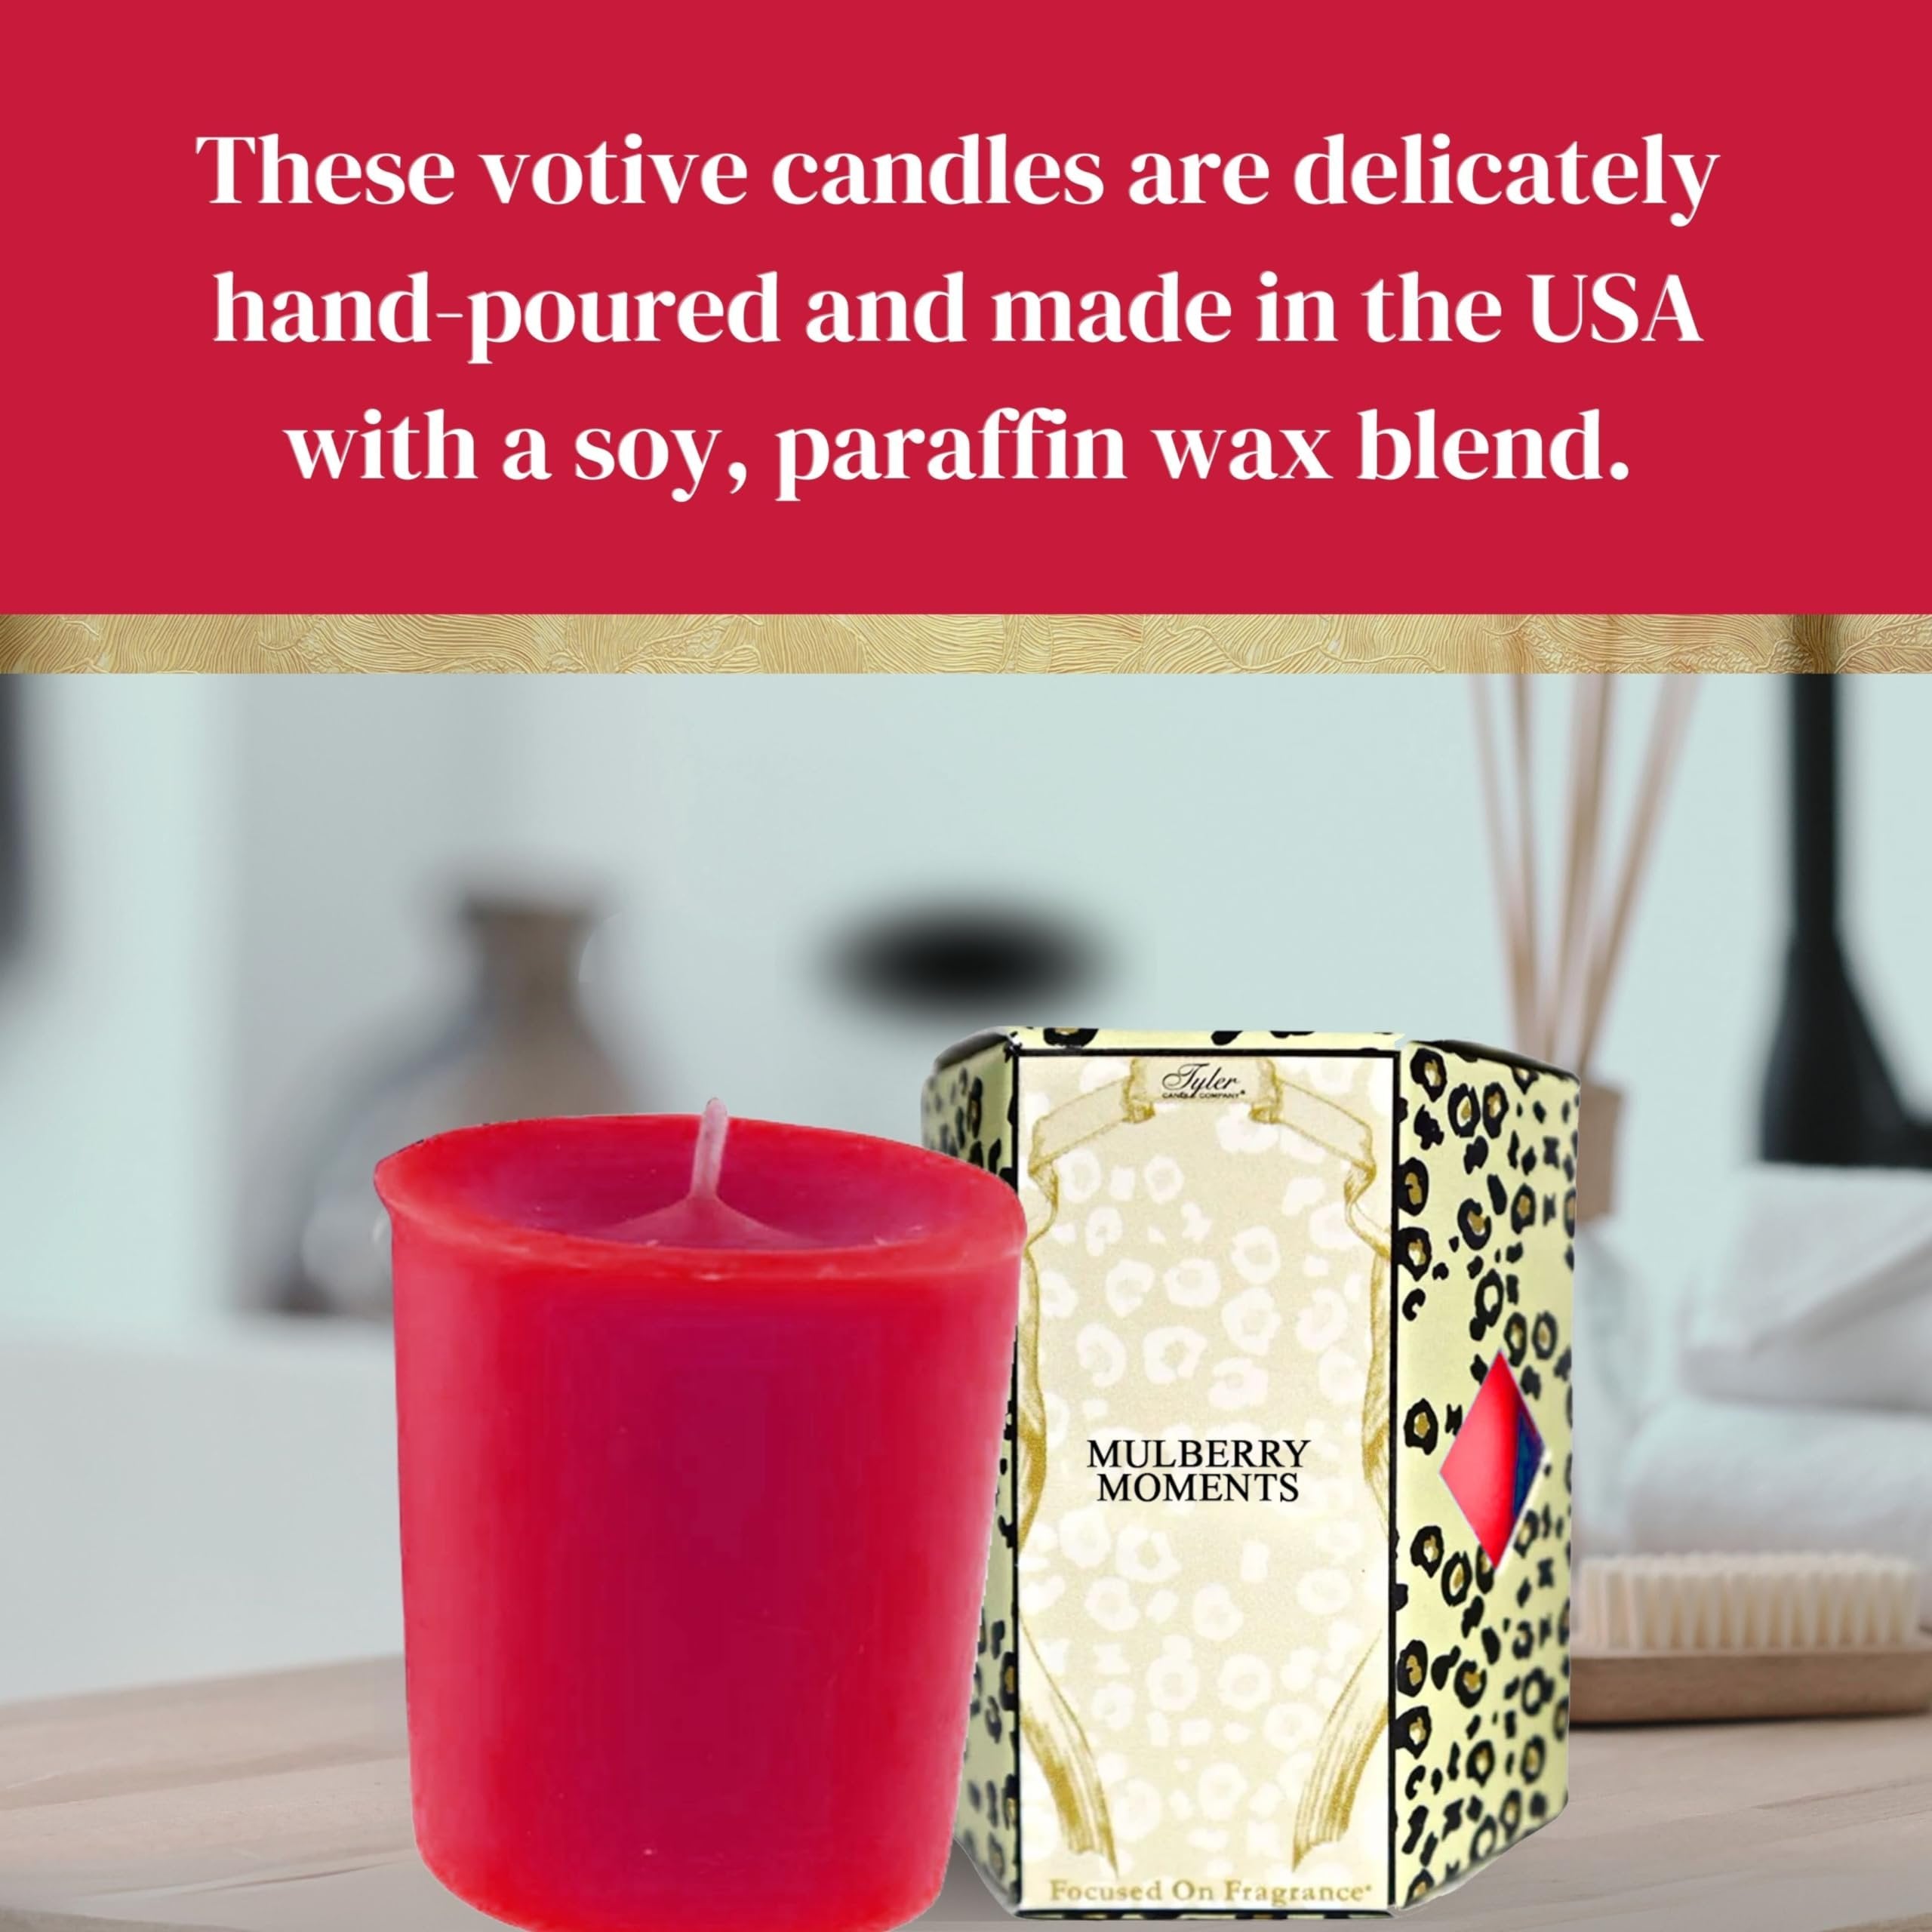 Worldwide Nutrition Bundle, 2 Items: Tyler Candle Company Mulberry Moments Votive Candles - Luxury Scented Candle with Essential Oils - 16 Counts of 2 oz Small Candles and Multi-Purpose Key Chain